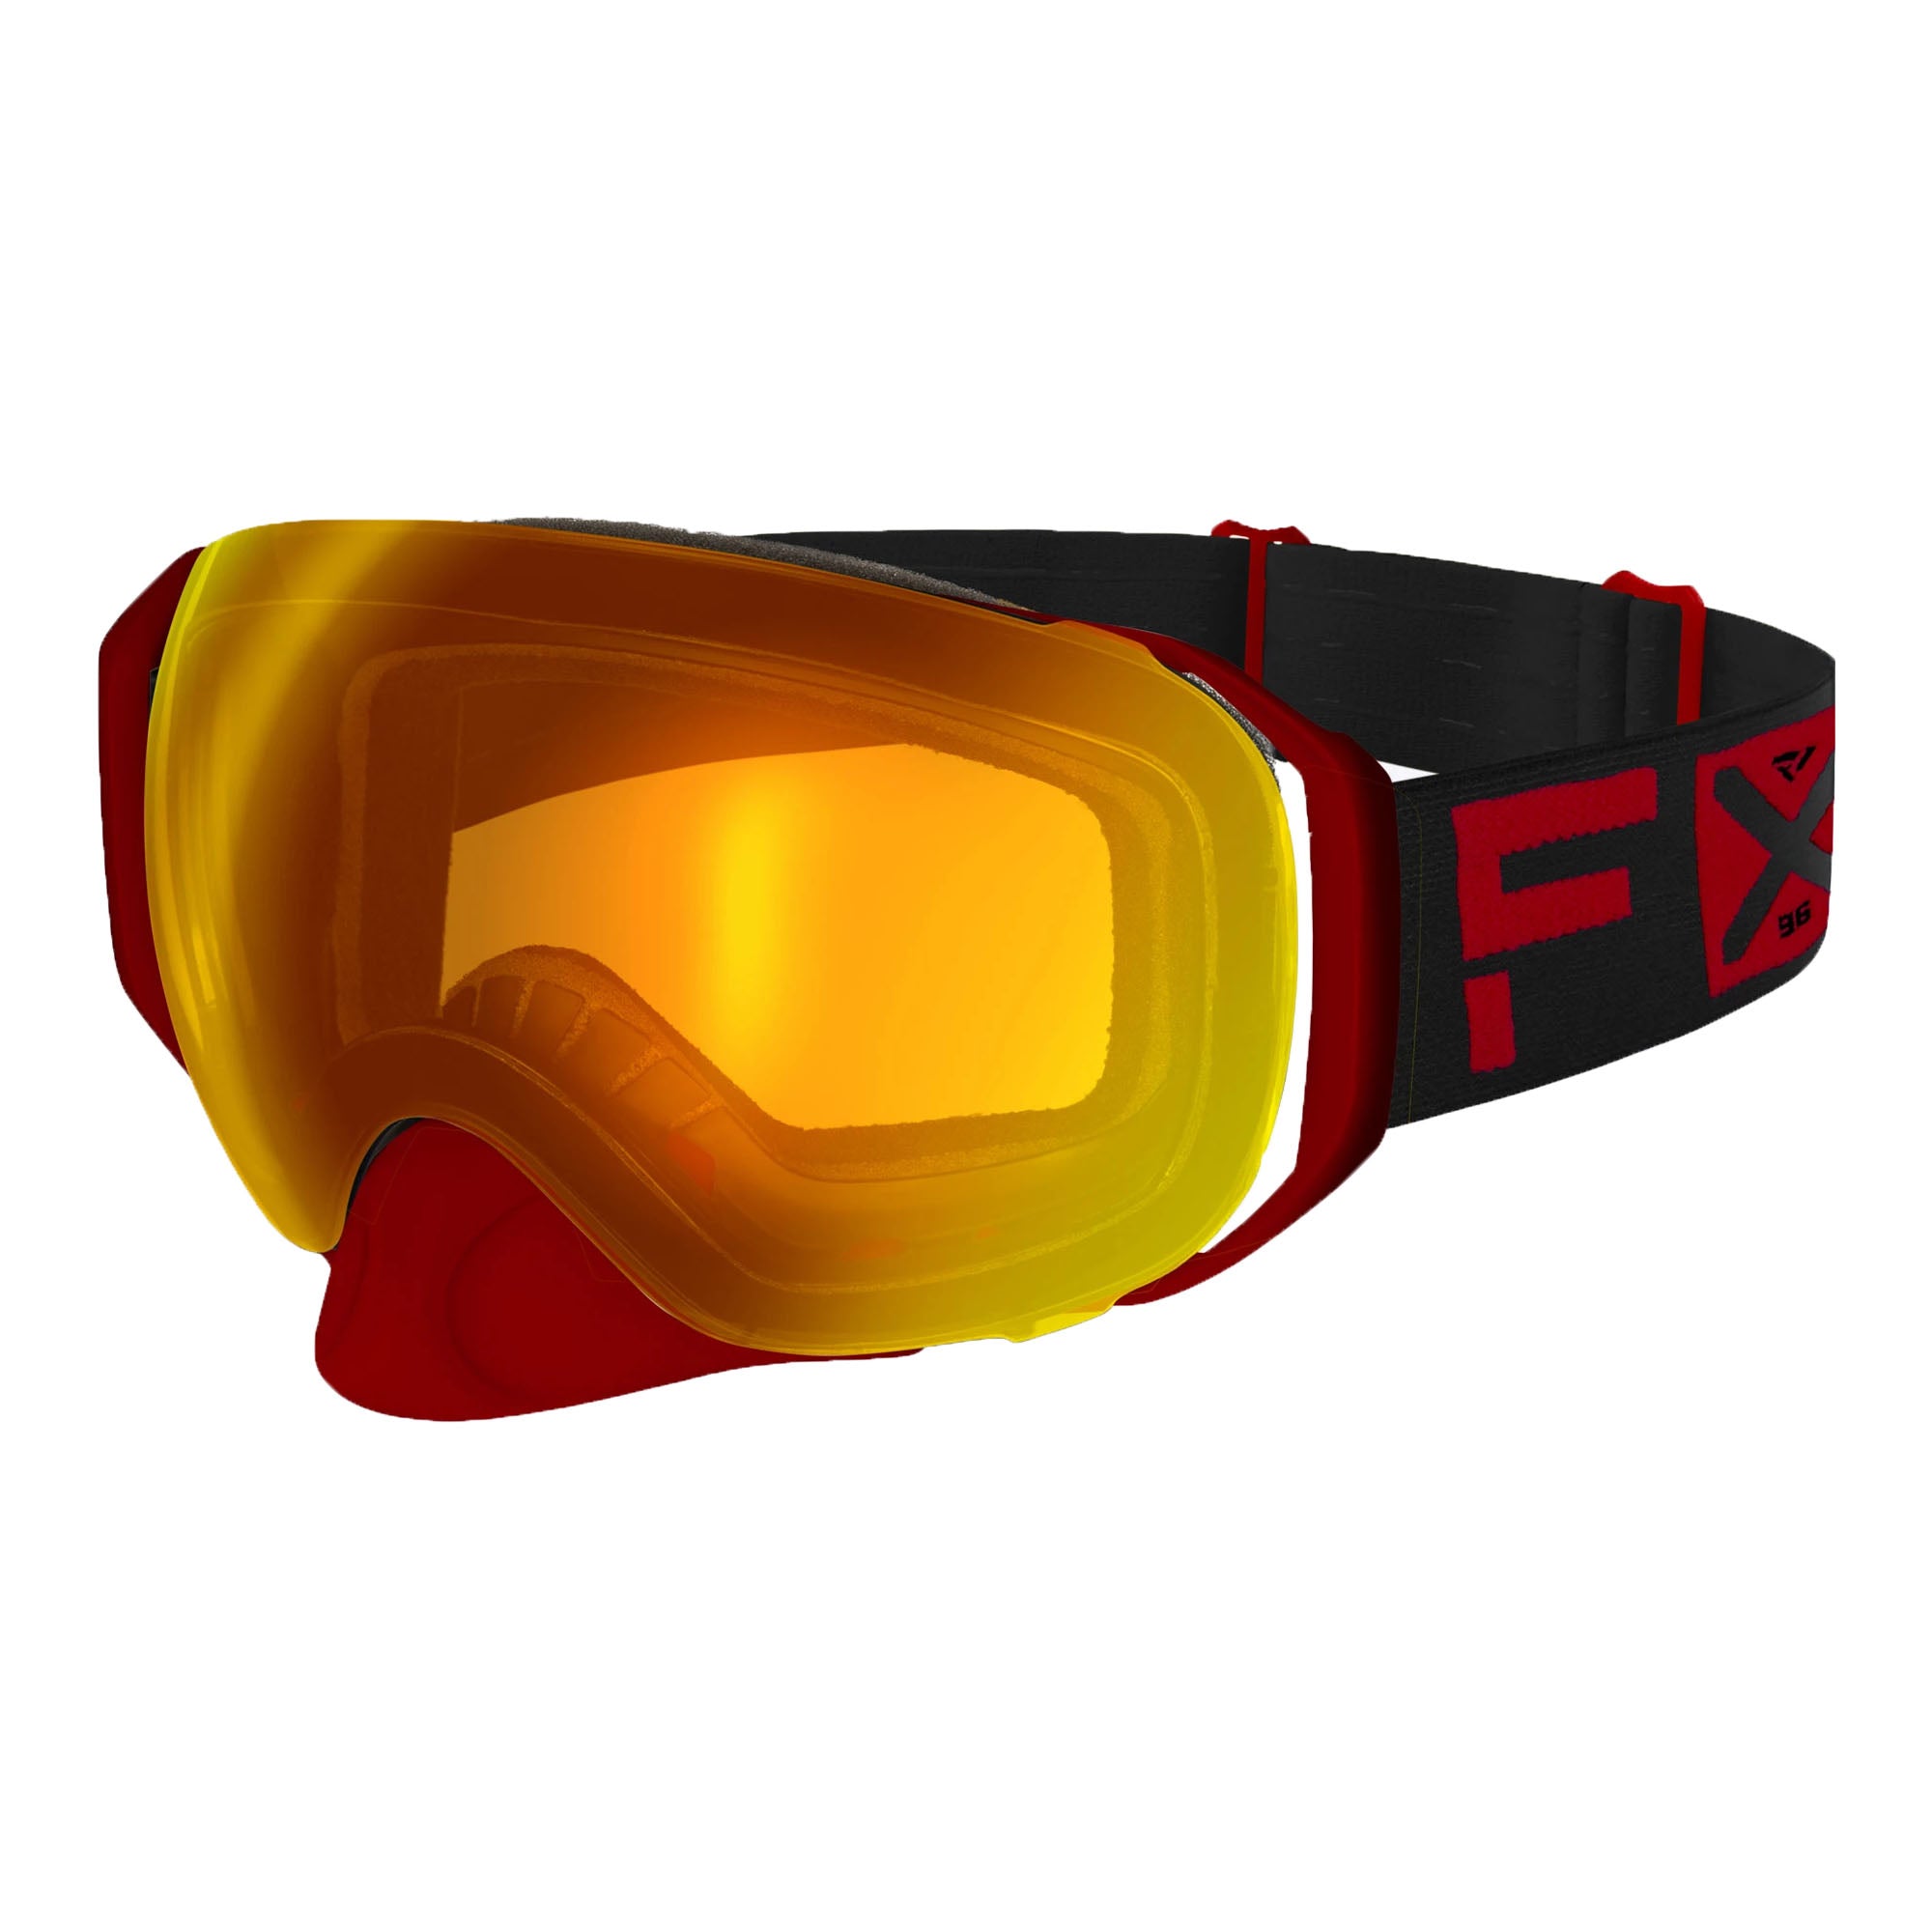 FXR 223107-3700-00 Ride X Spherical Goggles